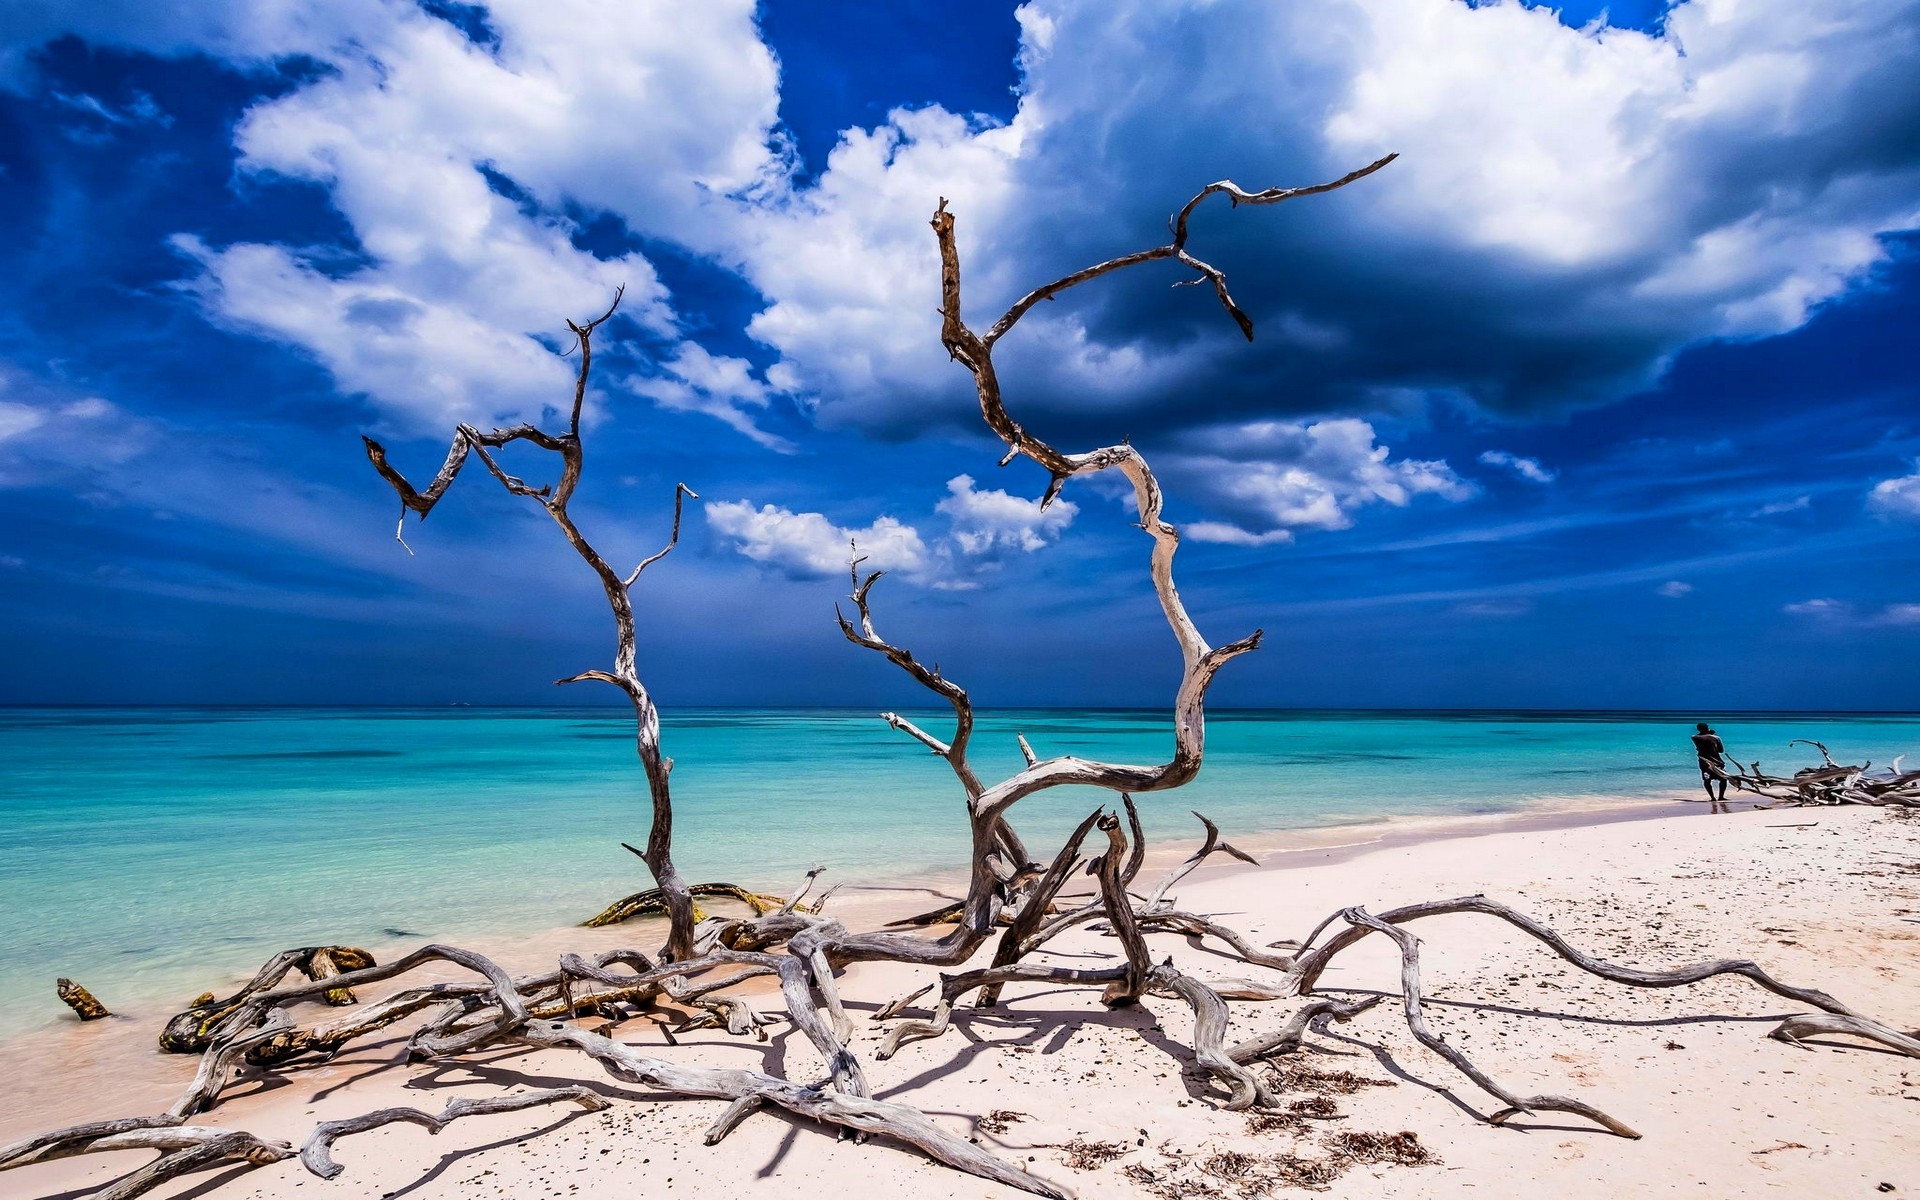 General 1920x1200 landscape nature beach sand tropical sea sky turquoise Caribbean water clouds dead trees Cuba outdoors horizon